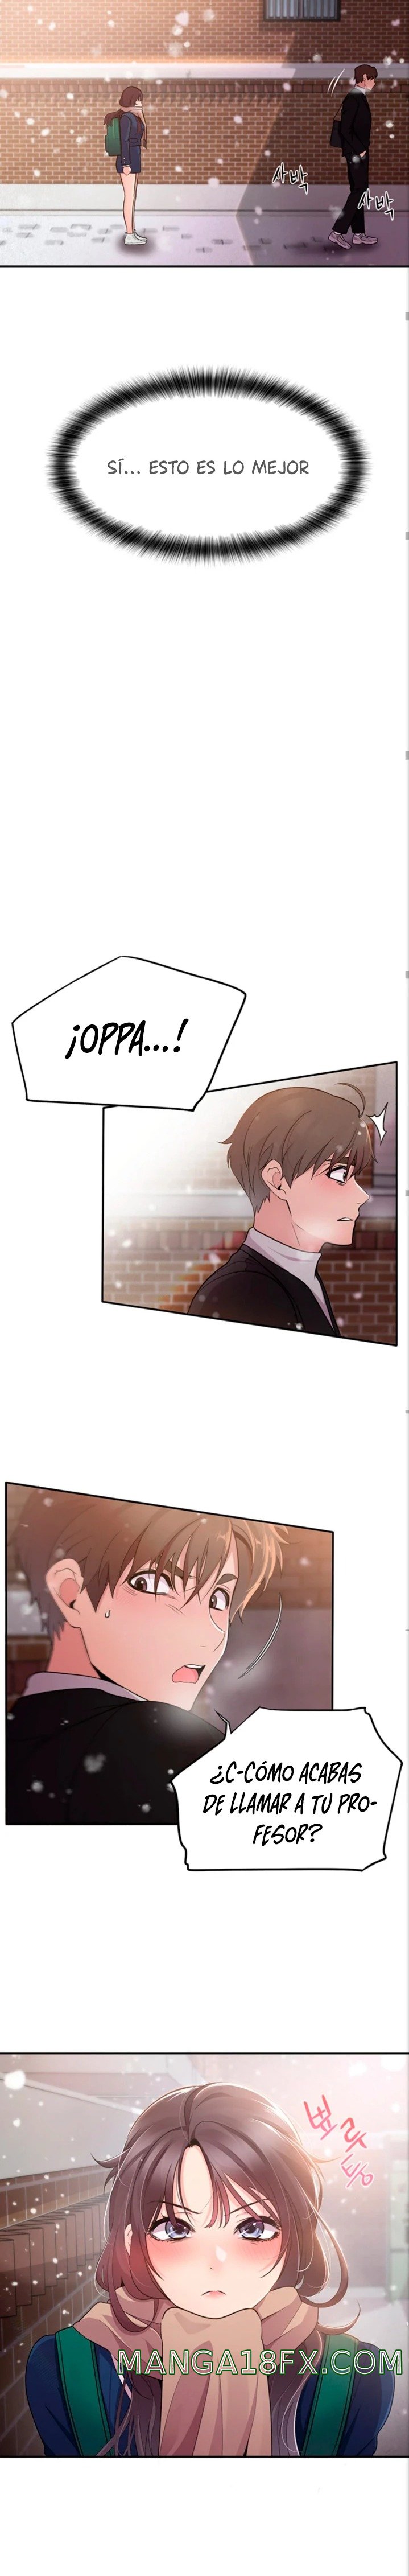 Meeting You Again Raw - Chapter 1 Page 24